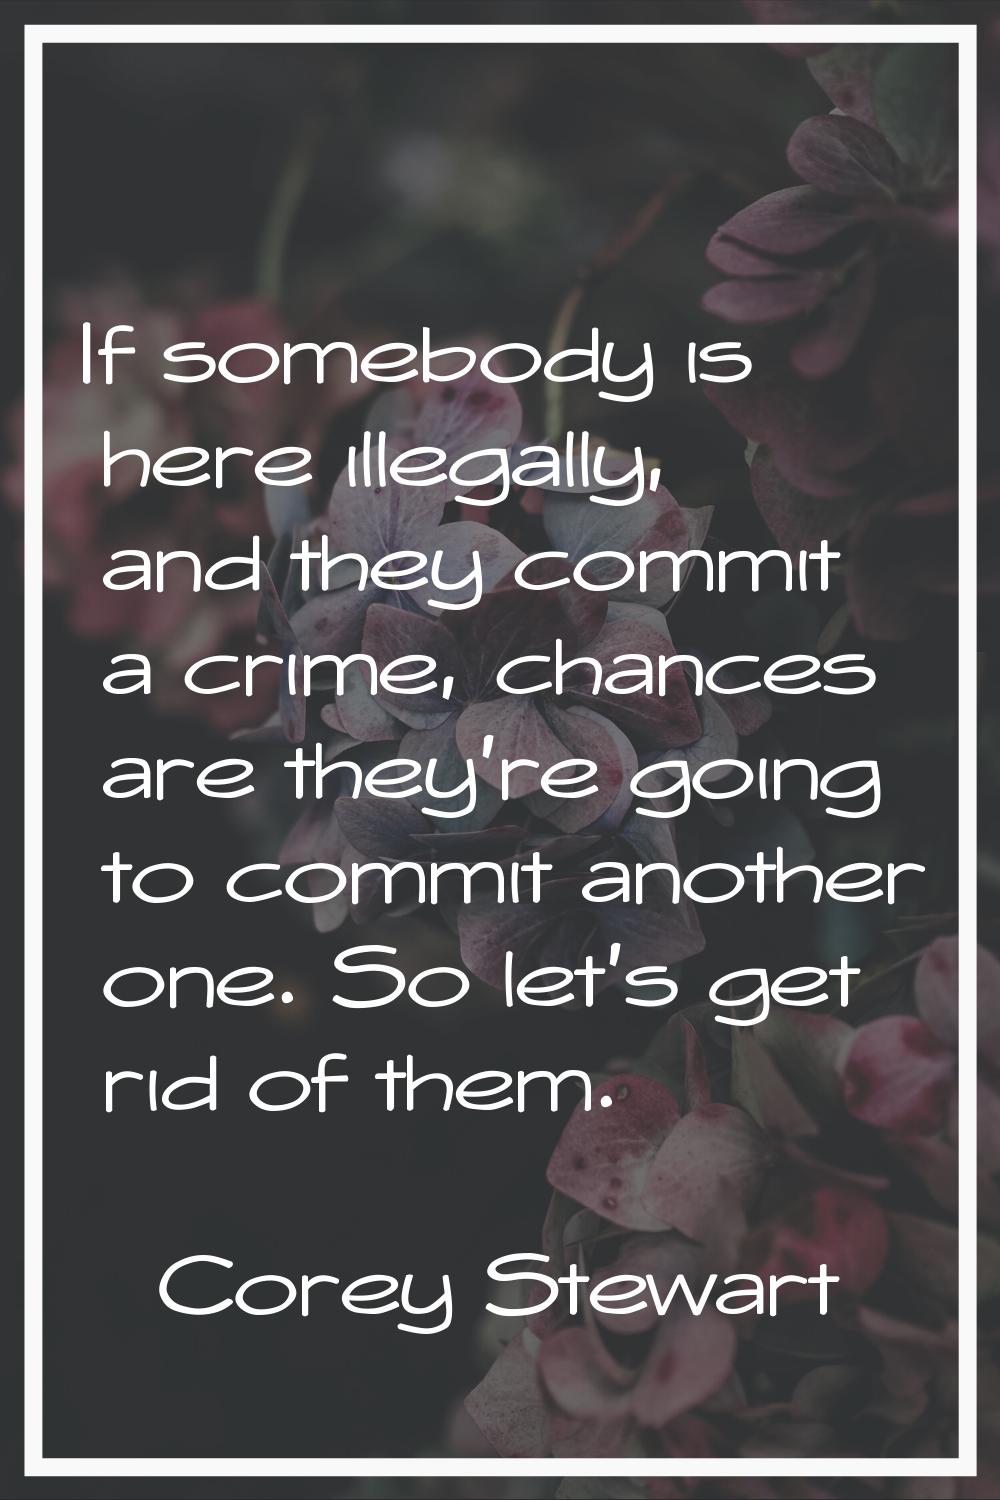 If somebody is here illegally, and they commit a crime, chances are they're going to commit another